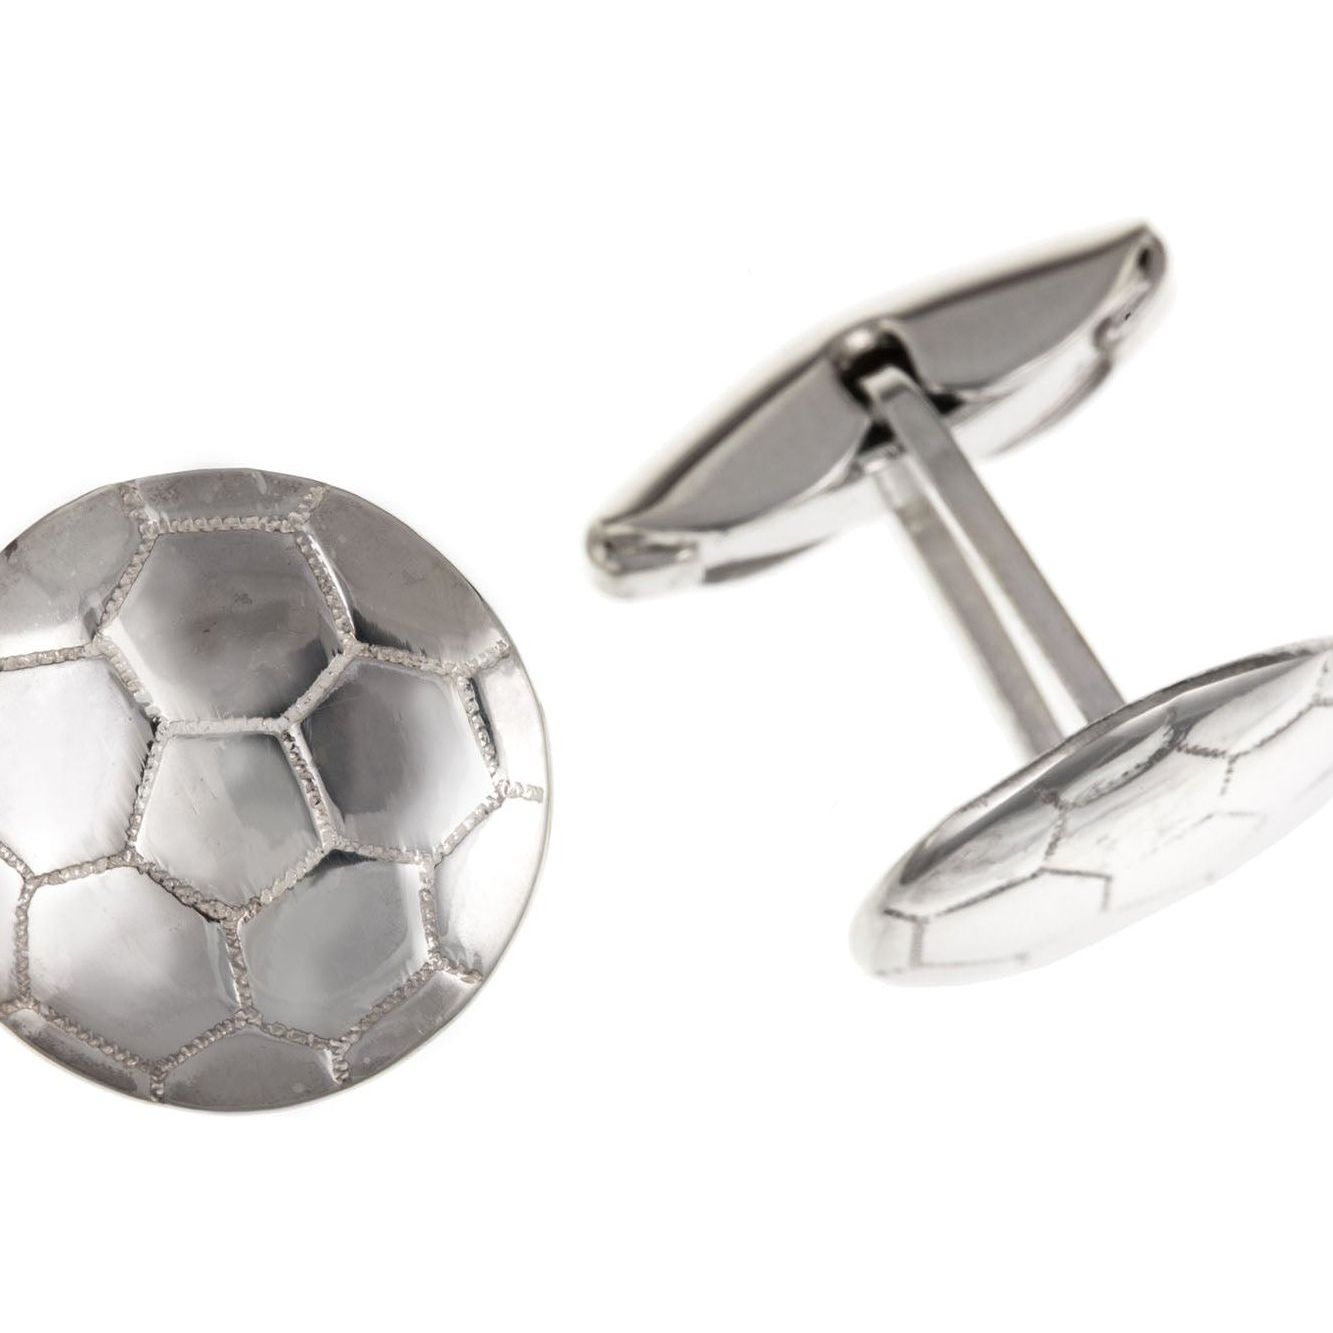 Sterling Silver Football Cufflinks - Ashton and Finch